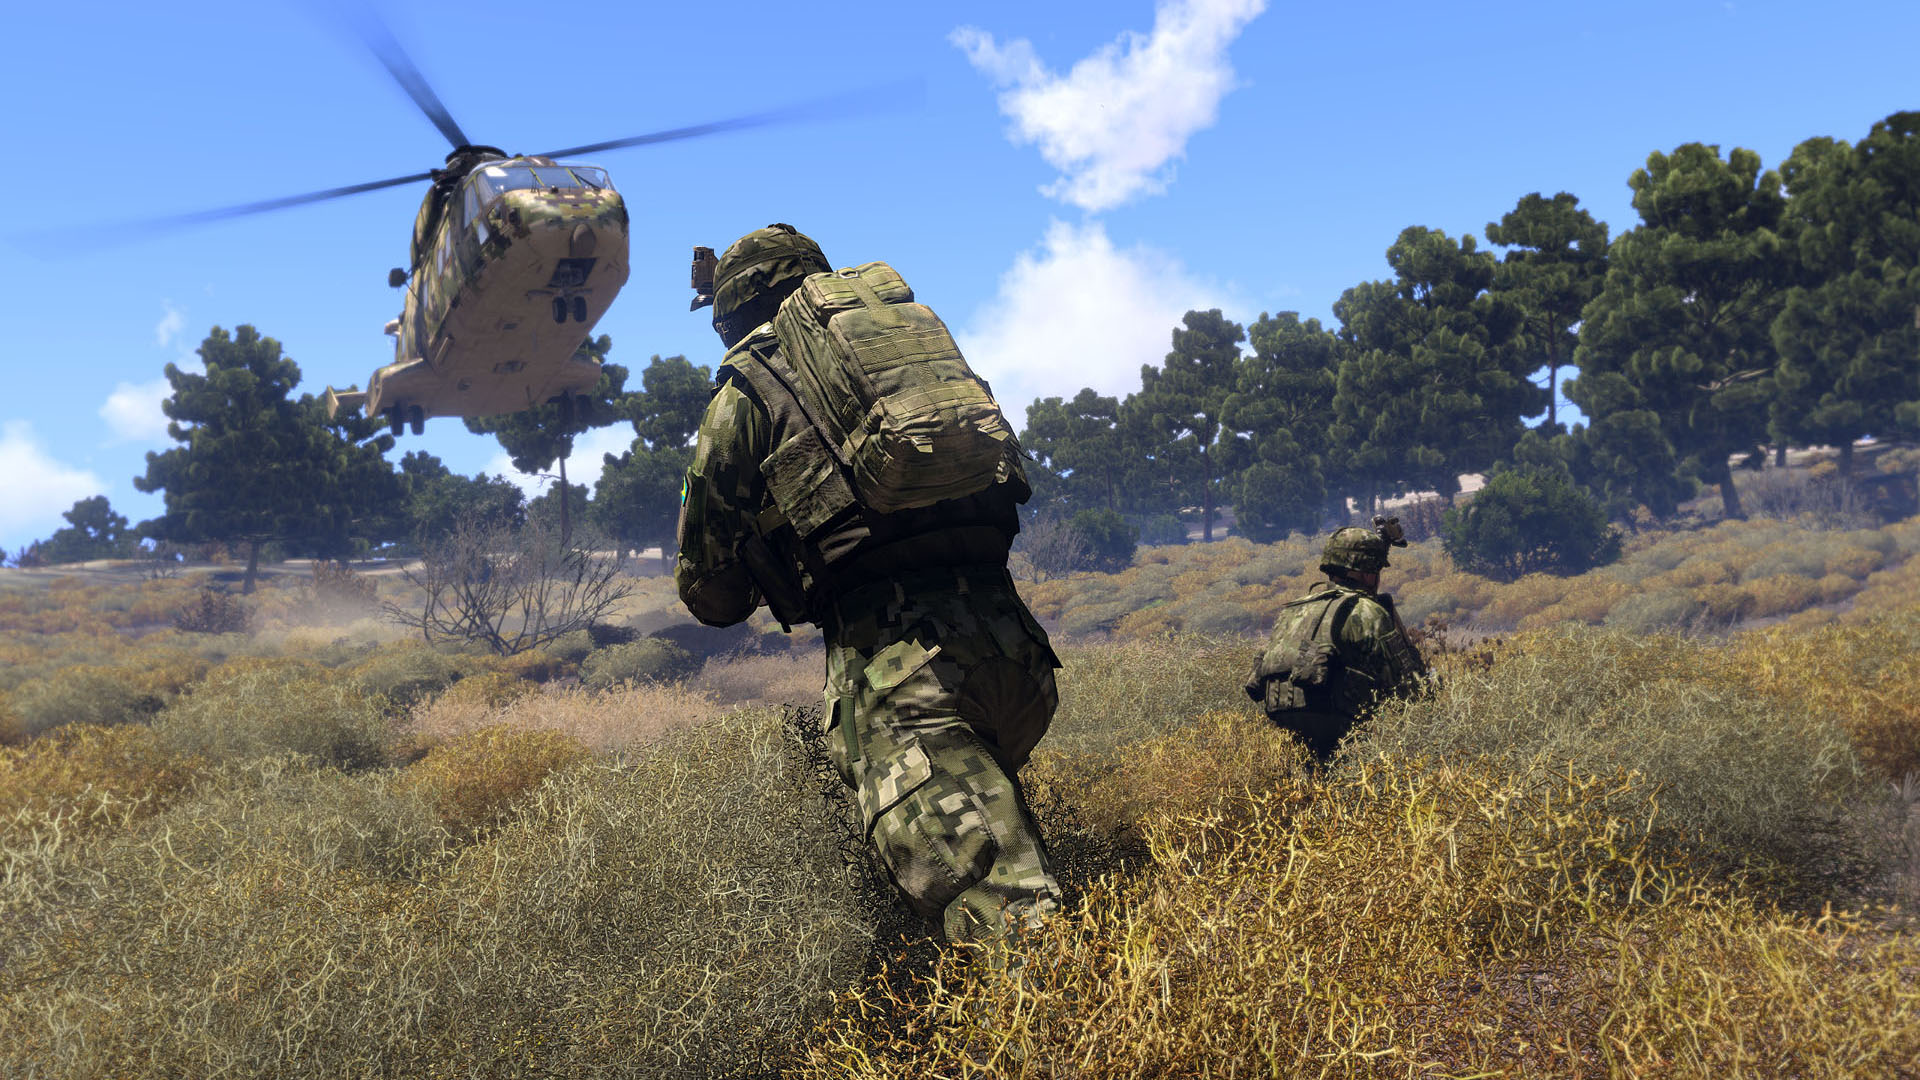 Find the best laptops for Arma 3